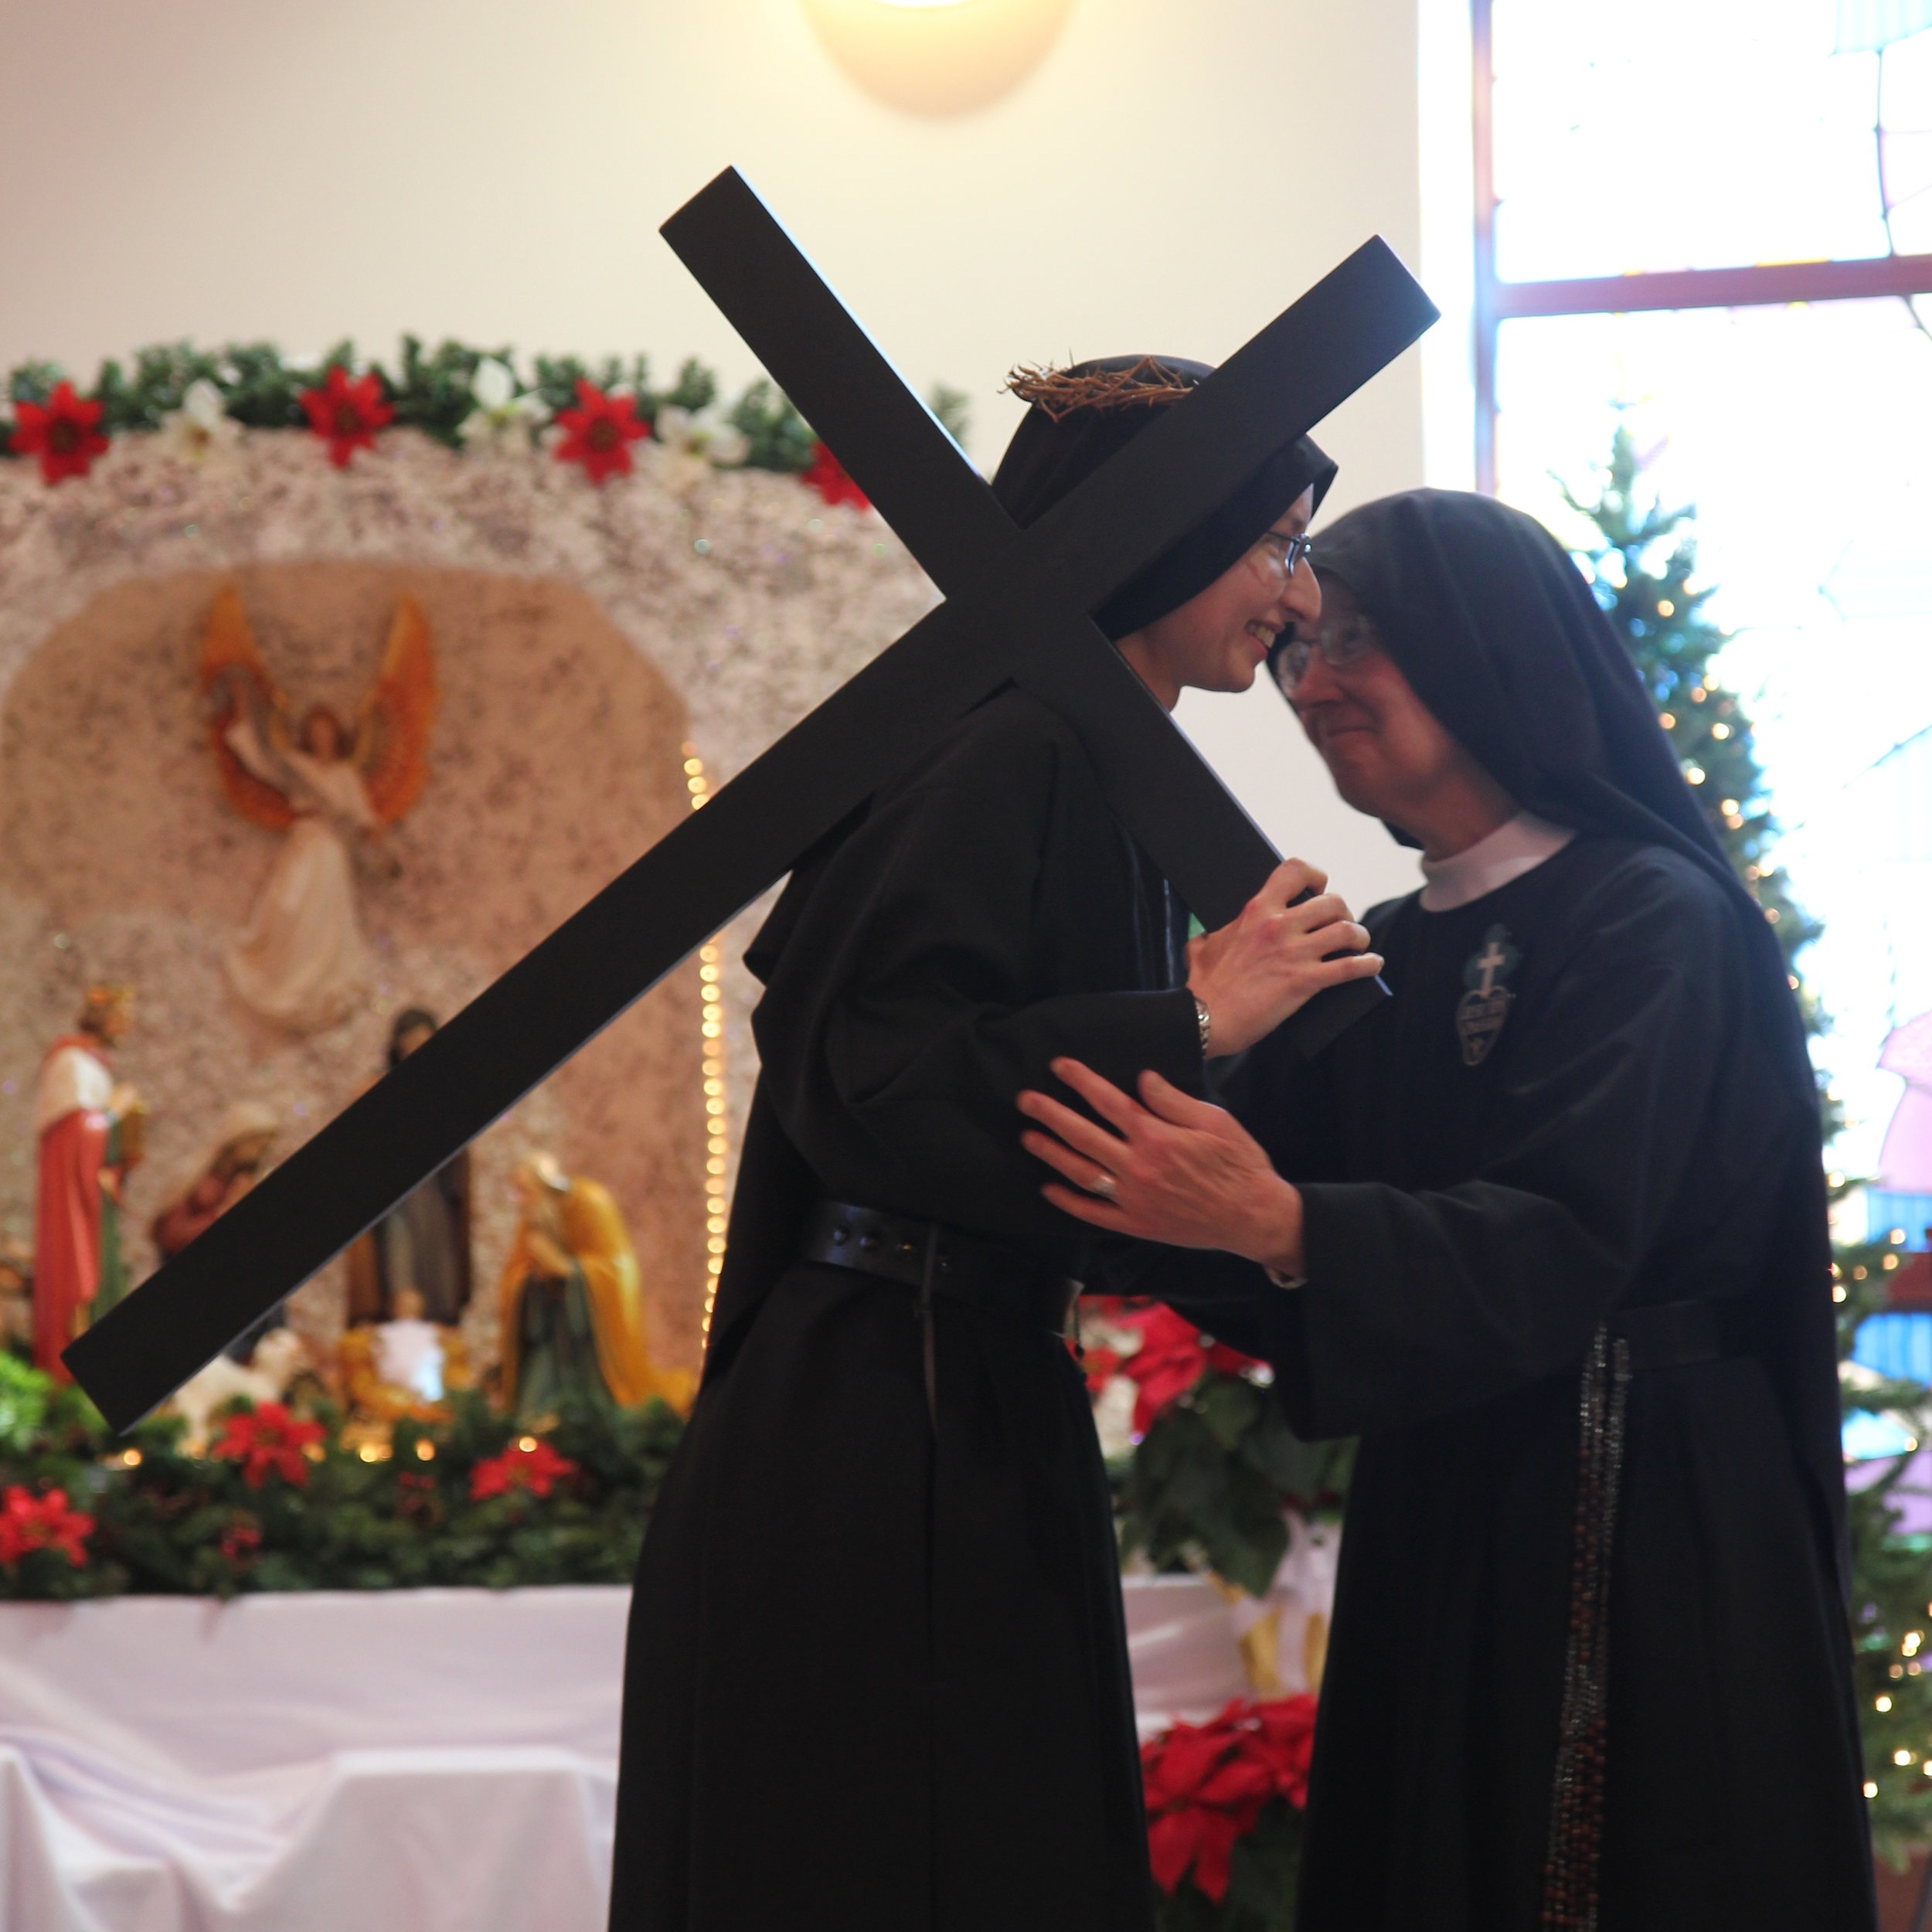  Sr. Mary Veronica, Novice Mistress and Juniorate Directress, exchanges the sign of peace with her spiritual daughter 